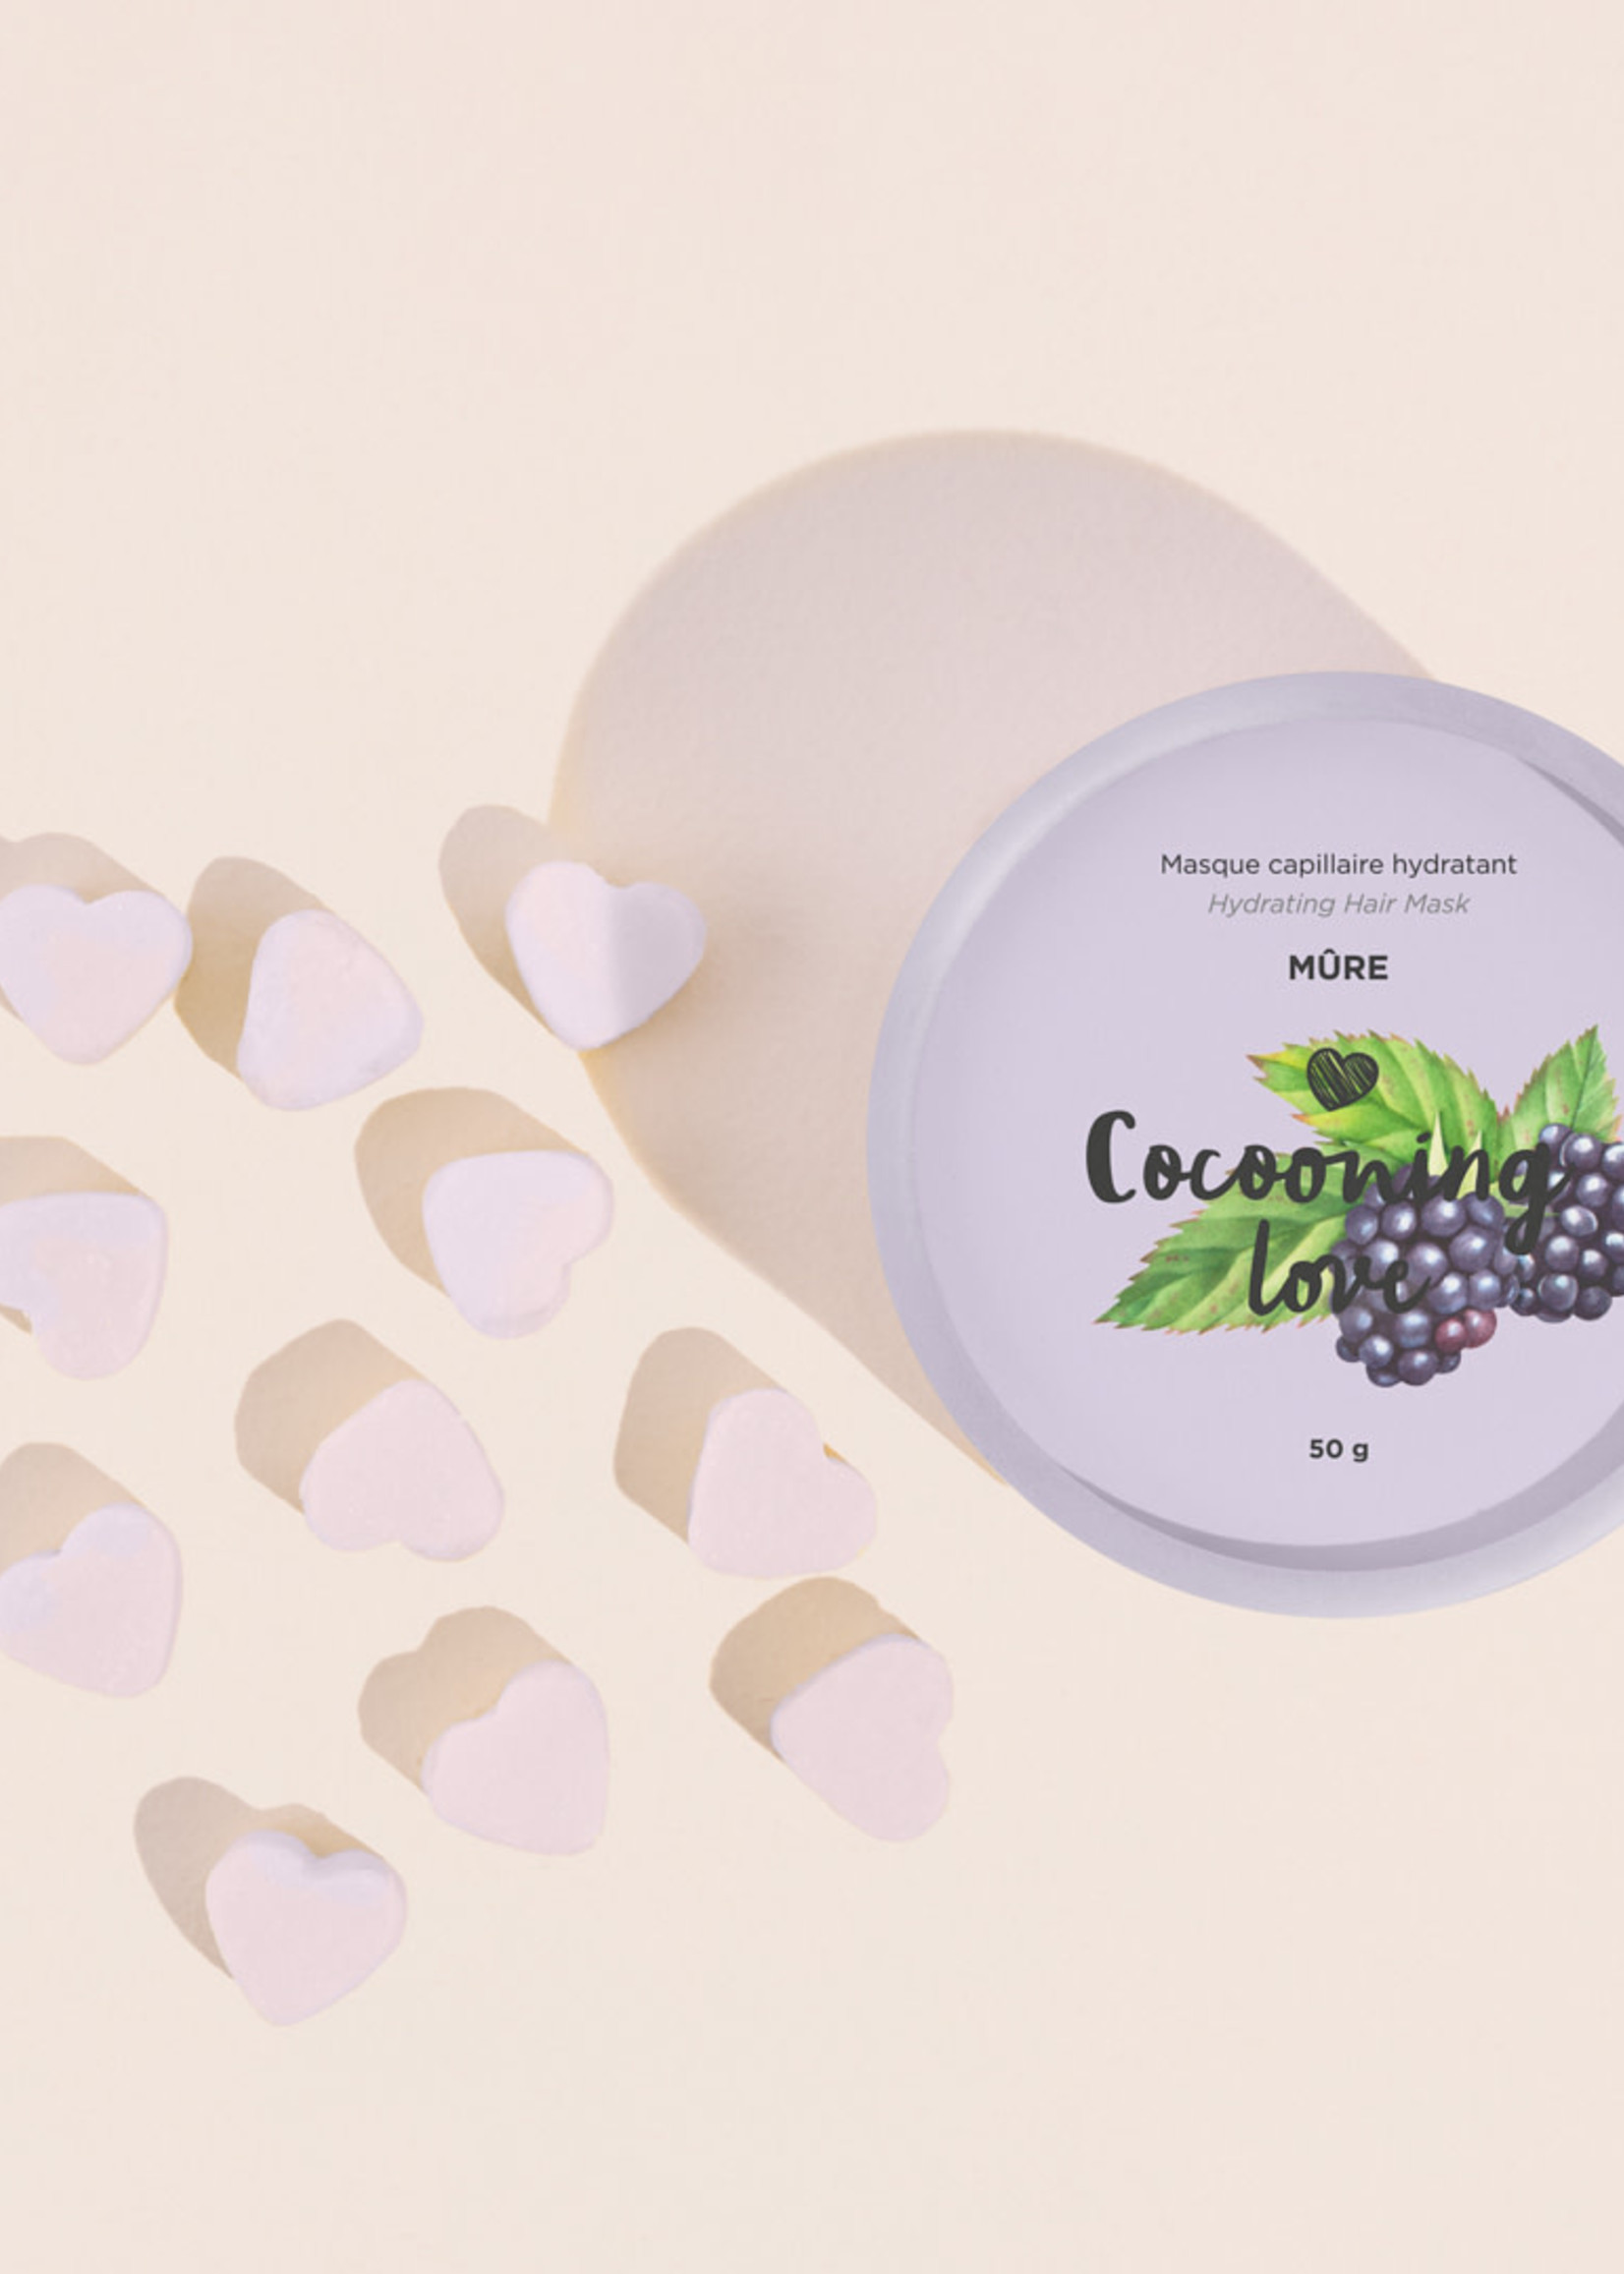 Cocooning love Masque capillaire hydratant - Mûre